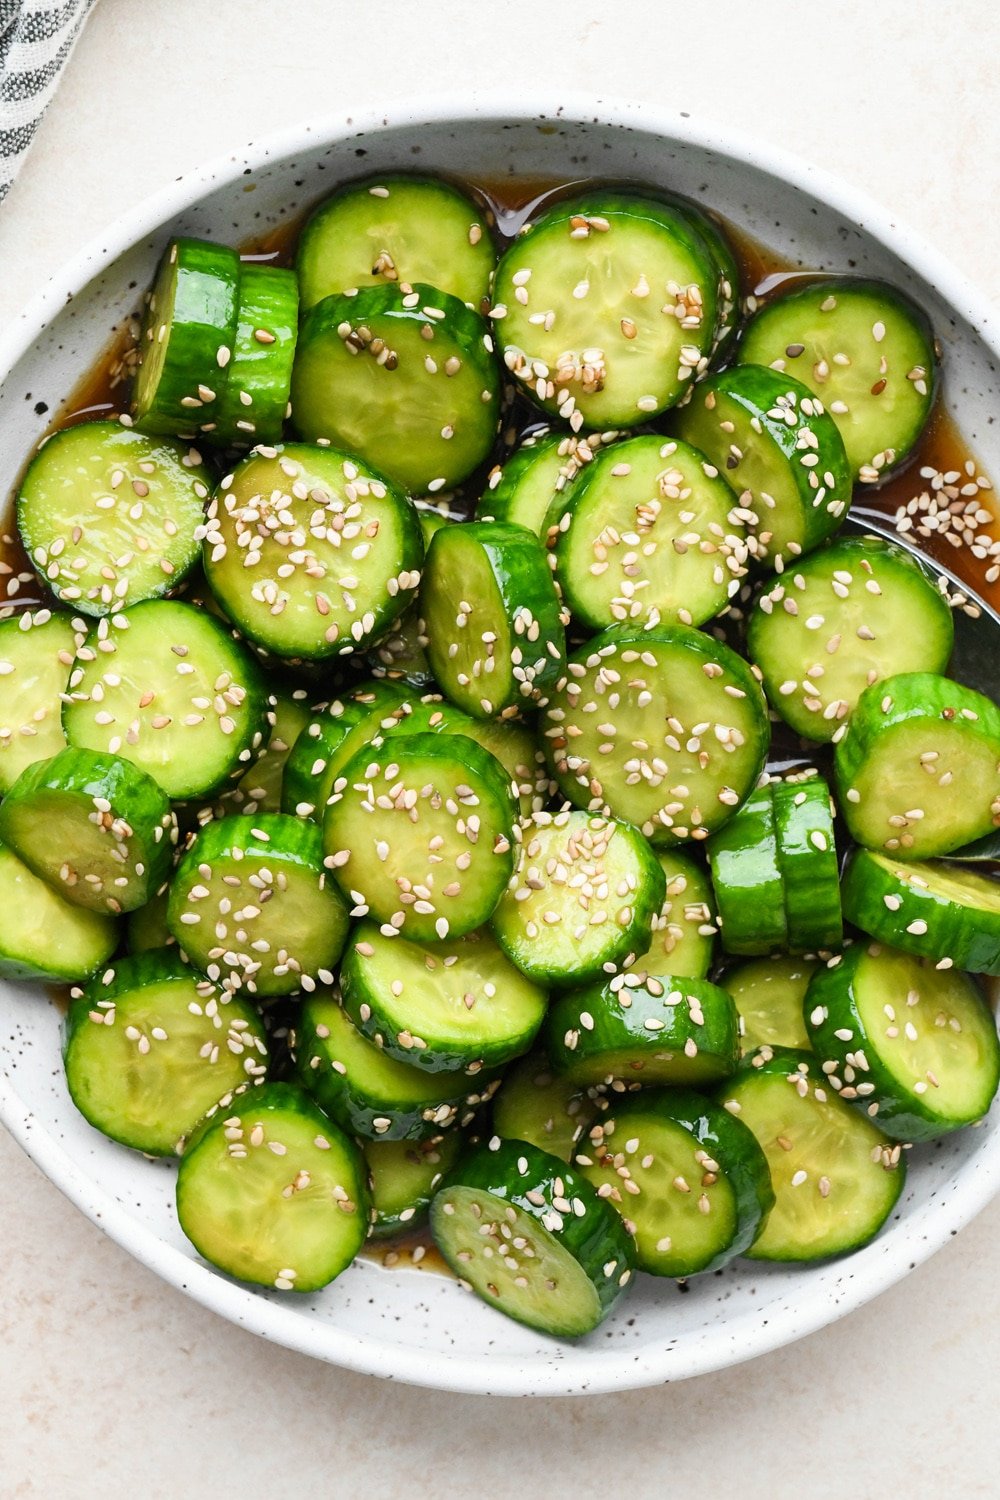 How to make cucumber sesame salad: Dressing poured over sliced cucumbers in a shallow ceramic serving bowl, after marinating and topping with additional sesame seeds.